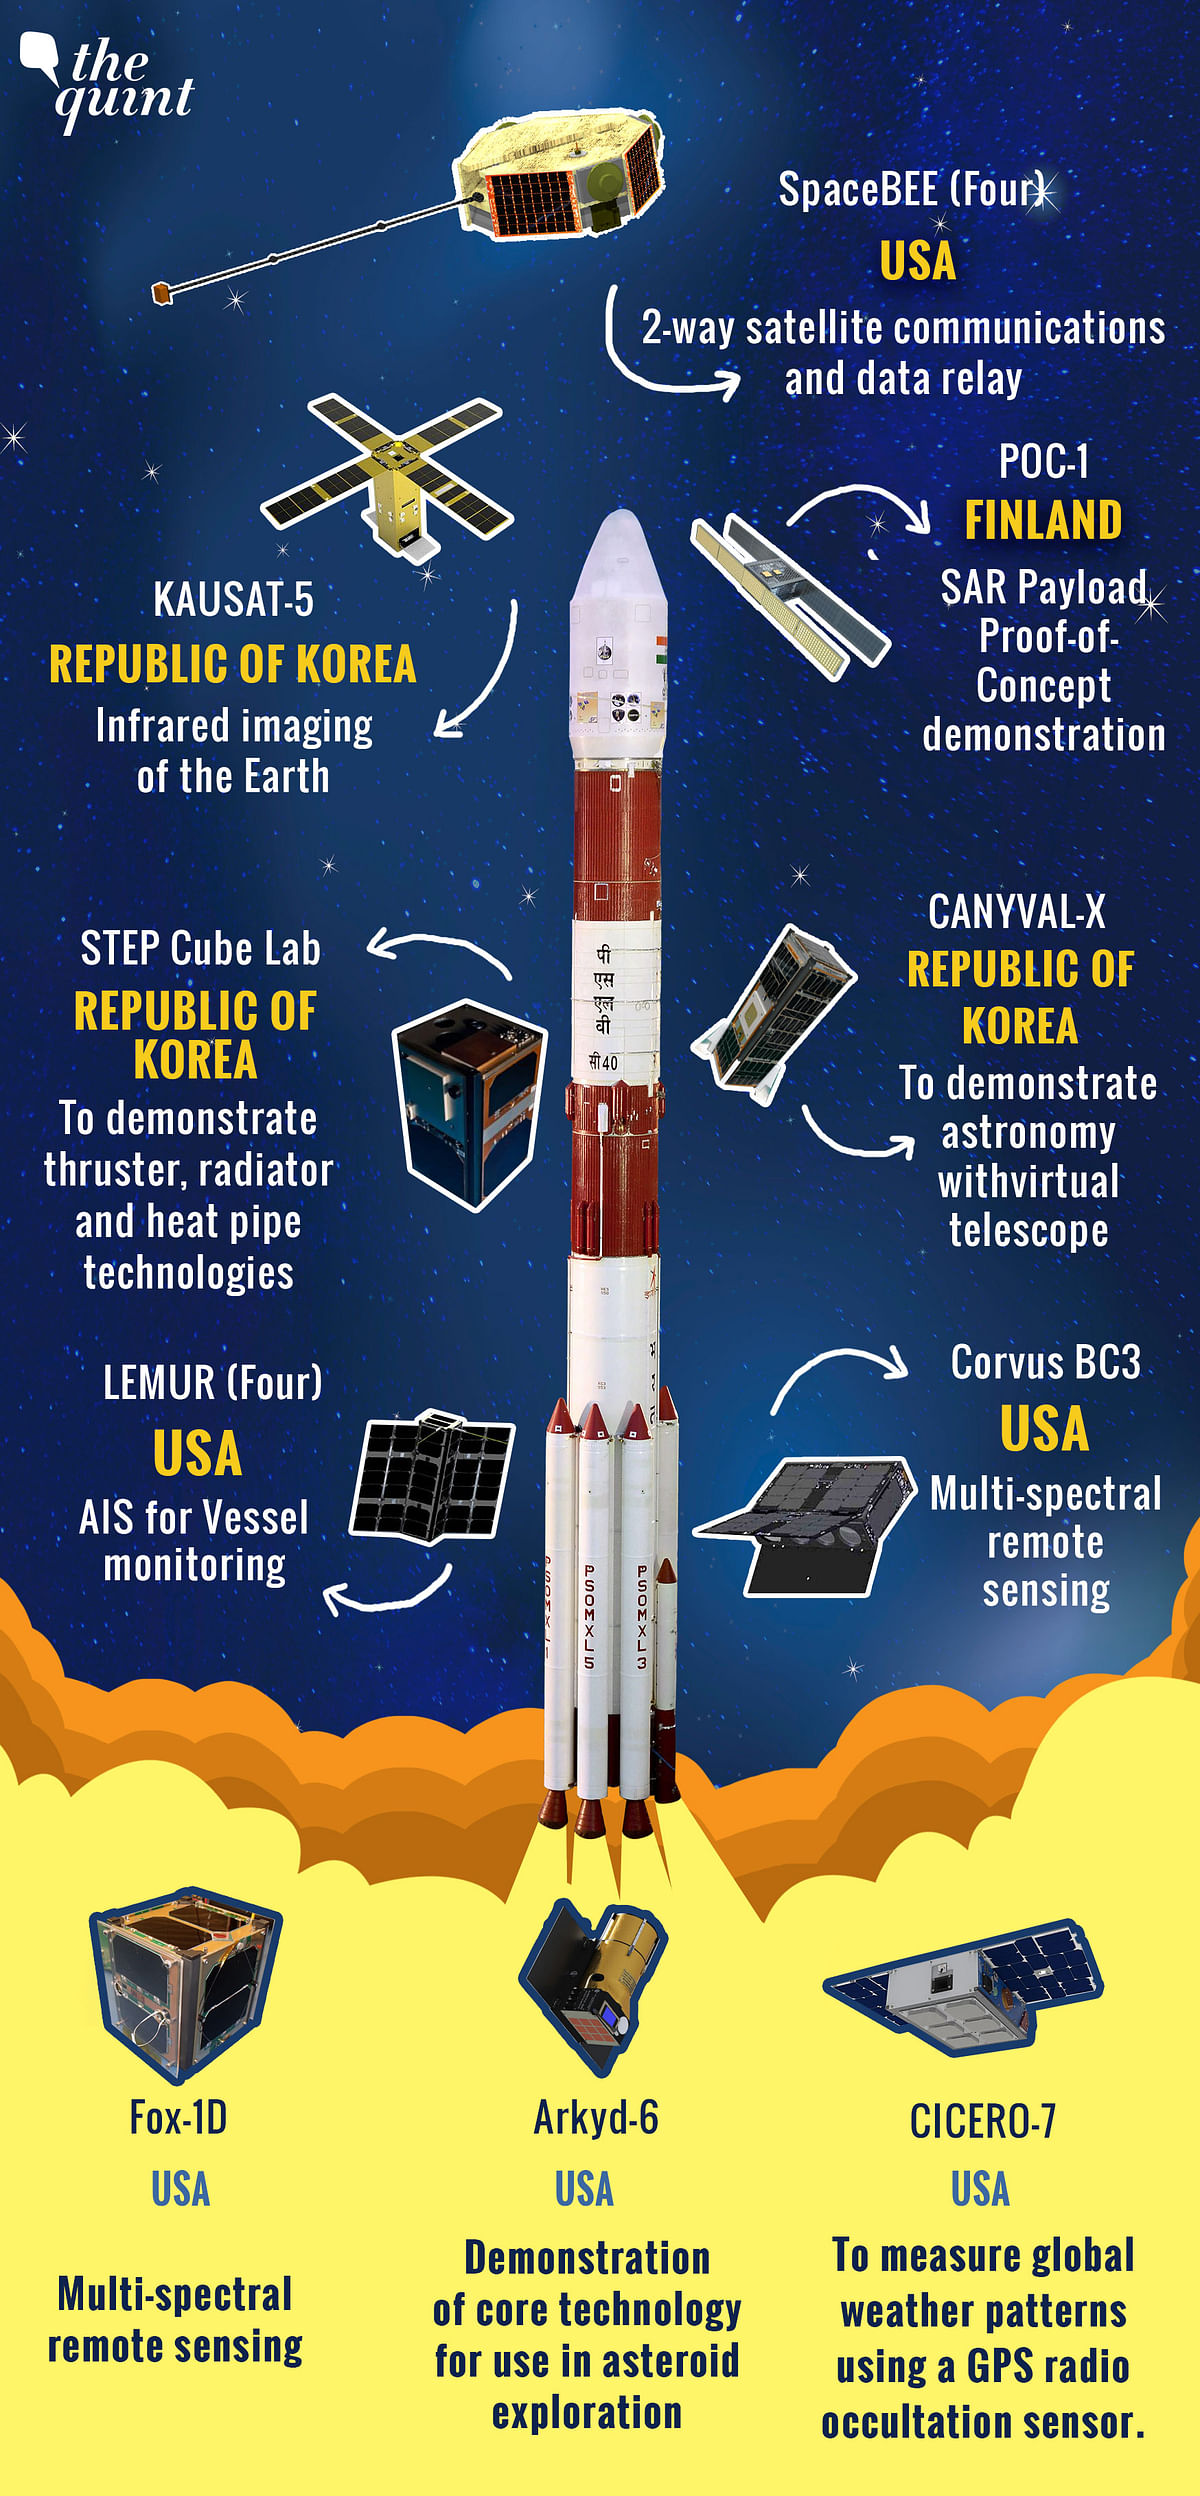 India launches its 100th satellite into space on the PSLV-C40. A look at the foreign passenger satellites.